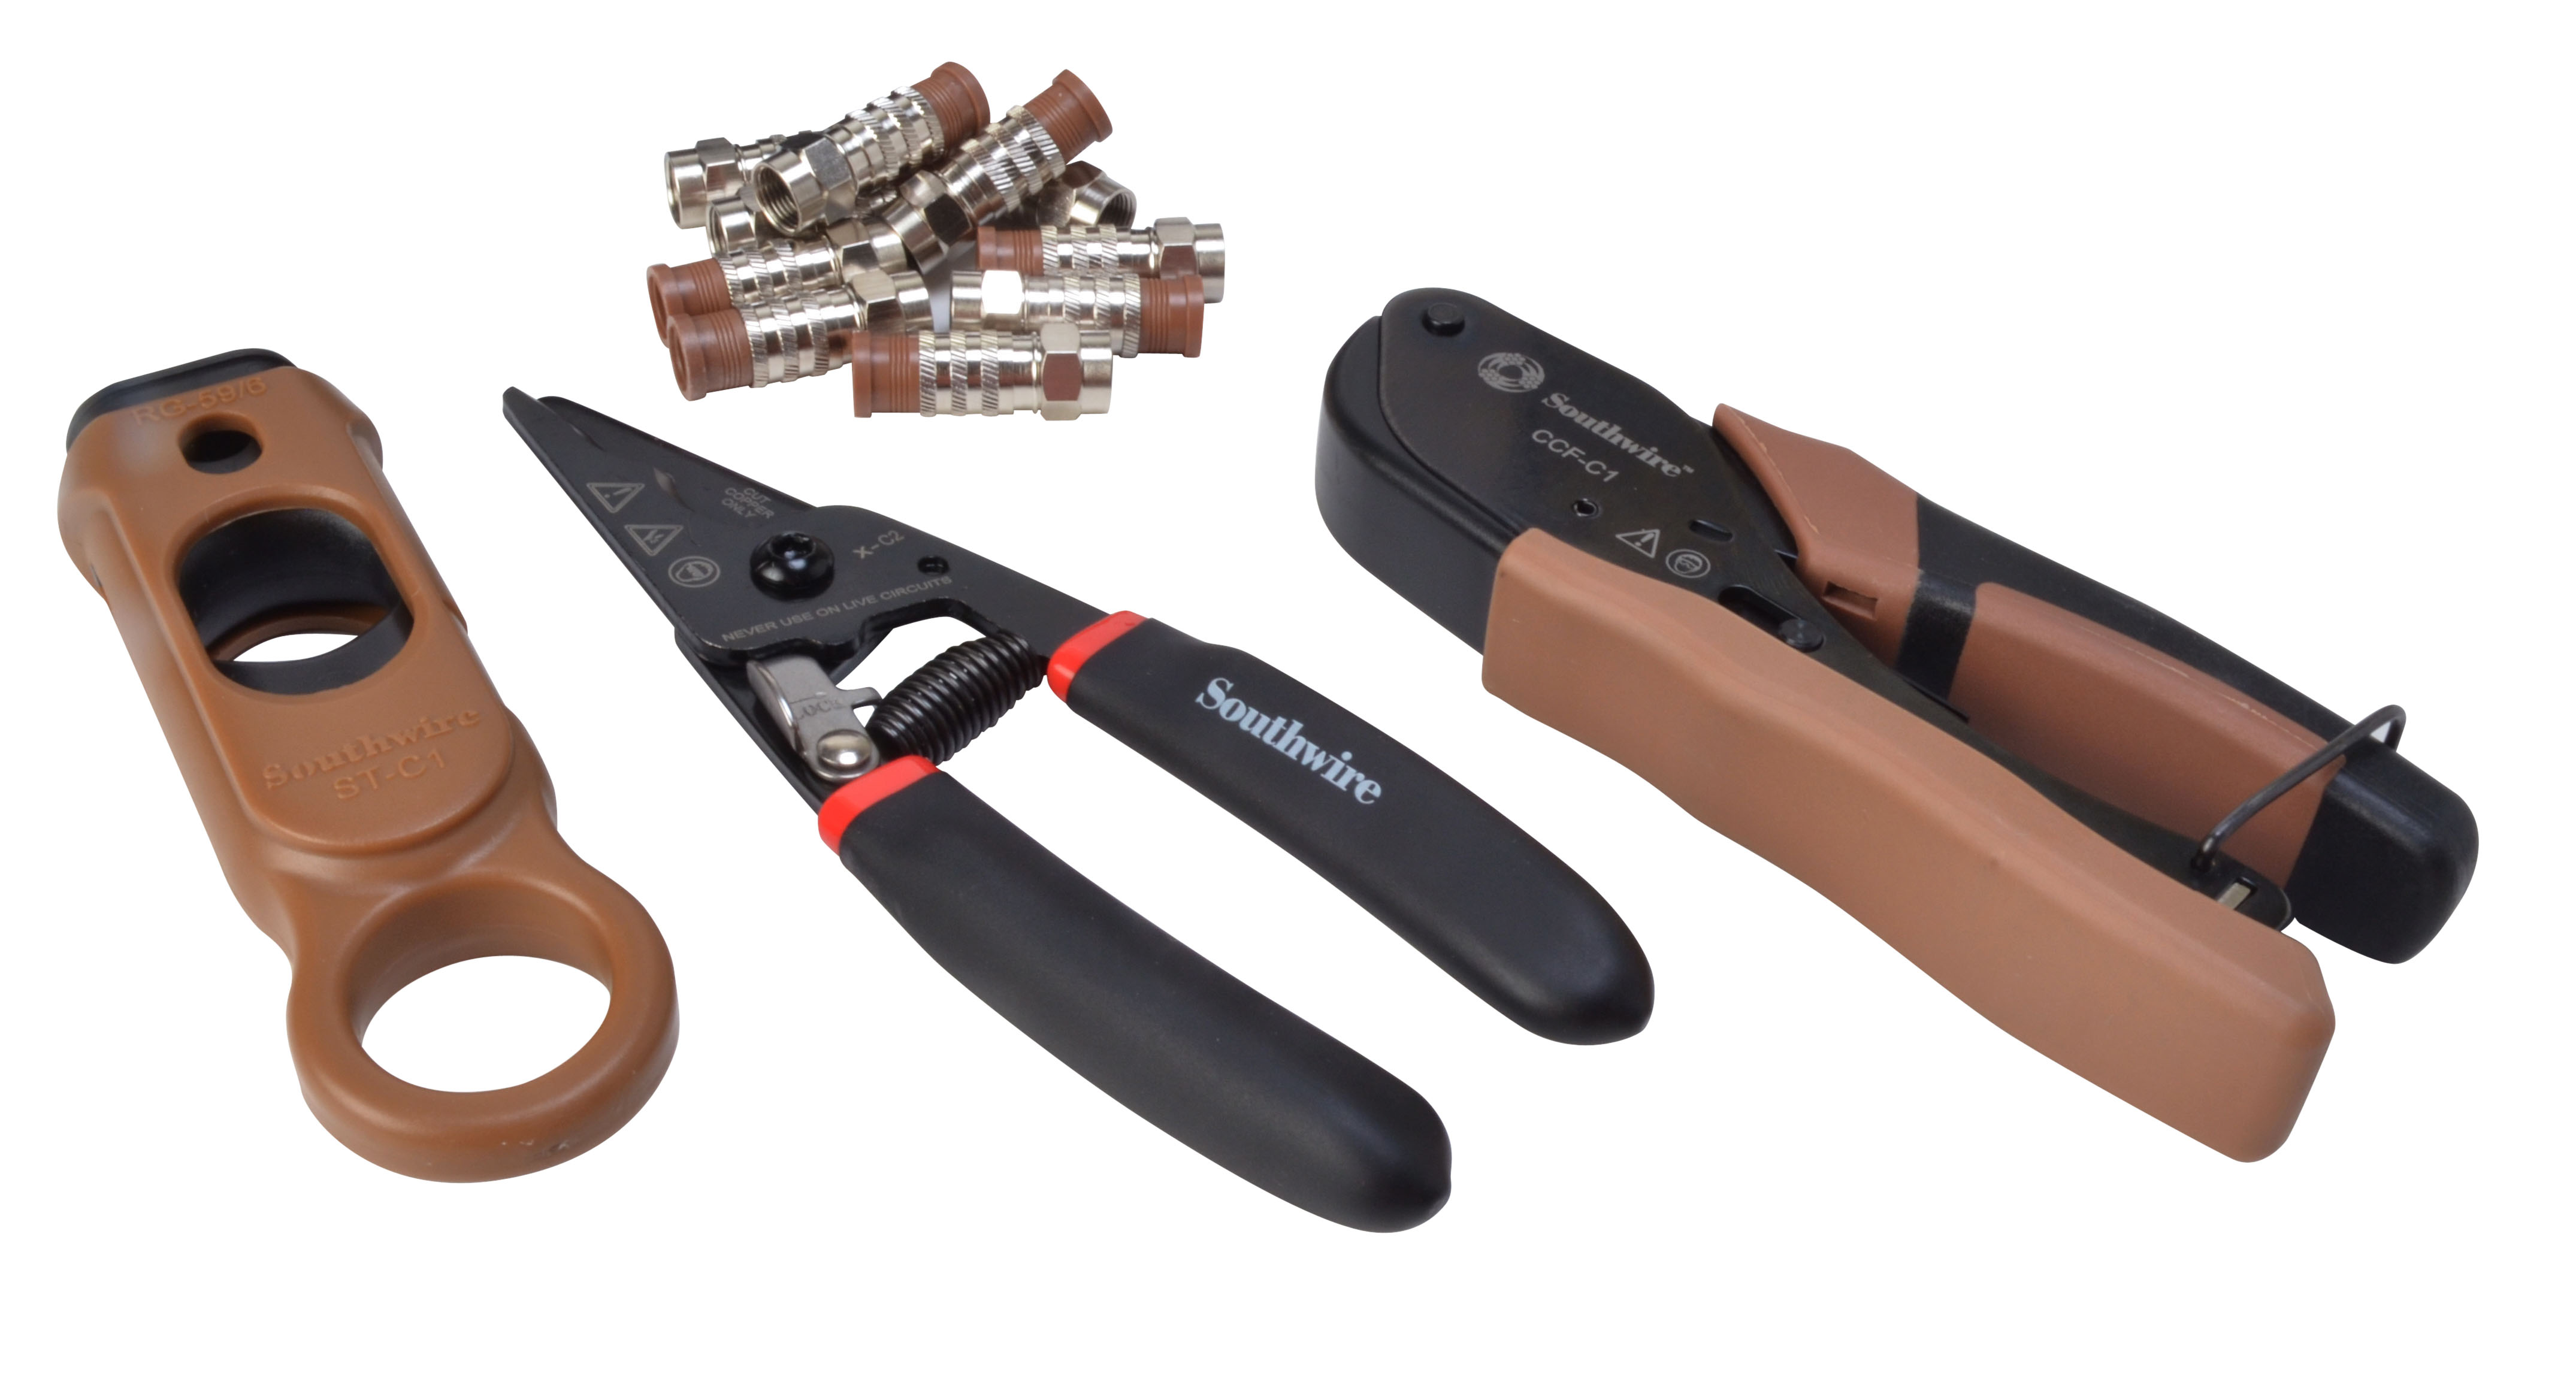 KIT-TP1 Network Tool Kit is a 13-piece kit that includes all the tools you need to cut, strip, terminate and install data cabling. Kit includes 3-in-1 cut/strip/crimp tool, comfort grip punchdown tool, reversible screwdriver, 10 RJ45 connectors and a rugged, durable carrying case.